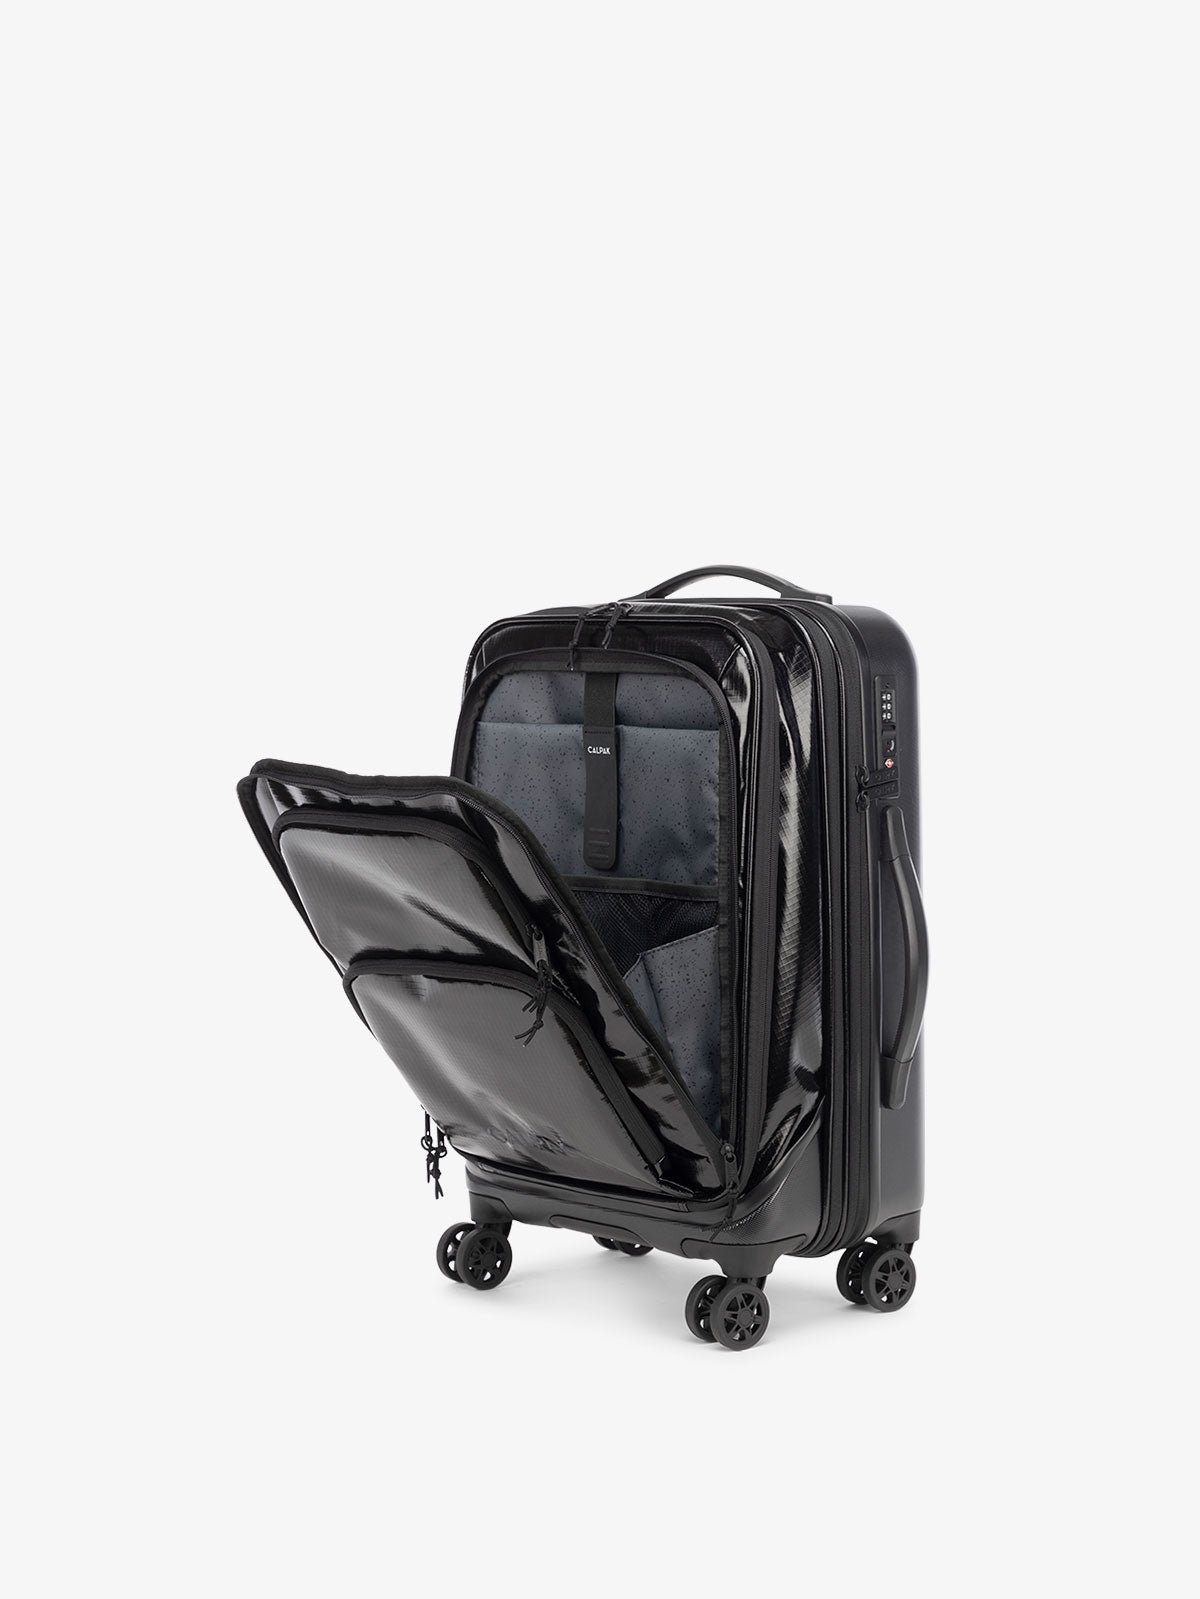 CALPAK Terra Carry-On expandable and water resistant Luggage with padded laptop compartment and 360 spinner wheels in obsidian